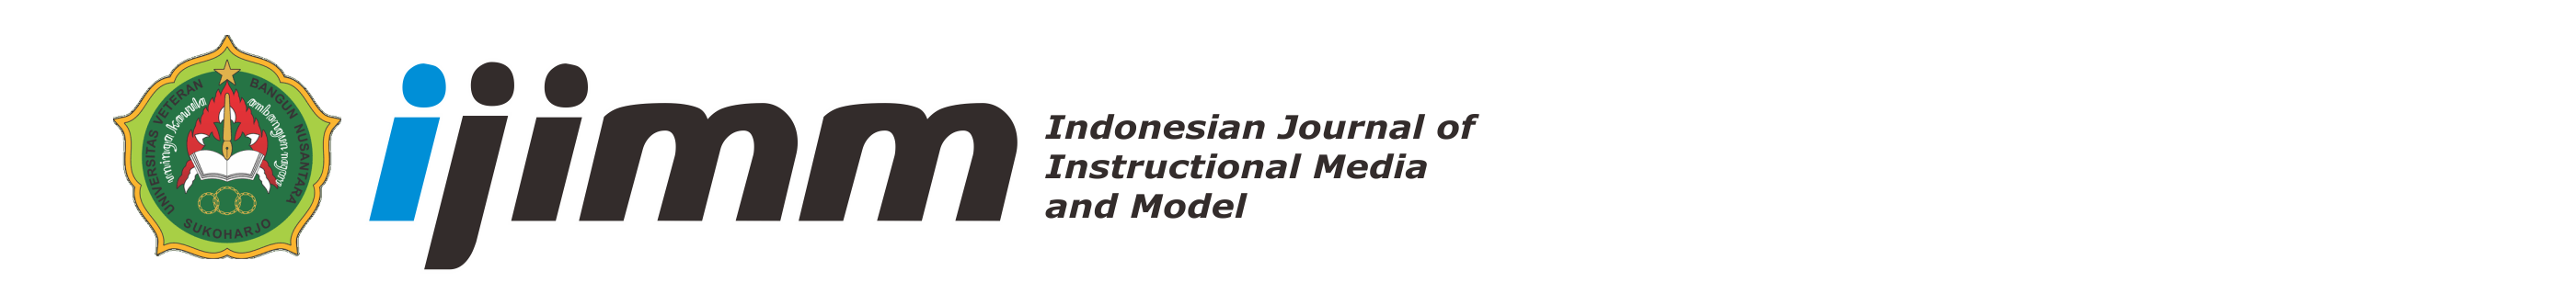 Indonesian Journal of Instructional Media and Model 